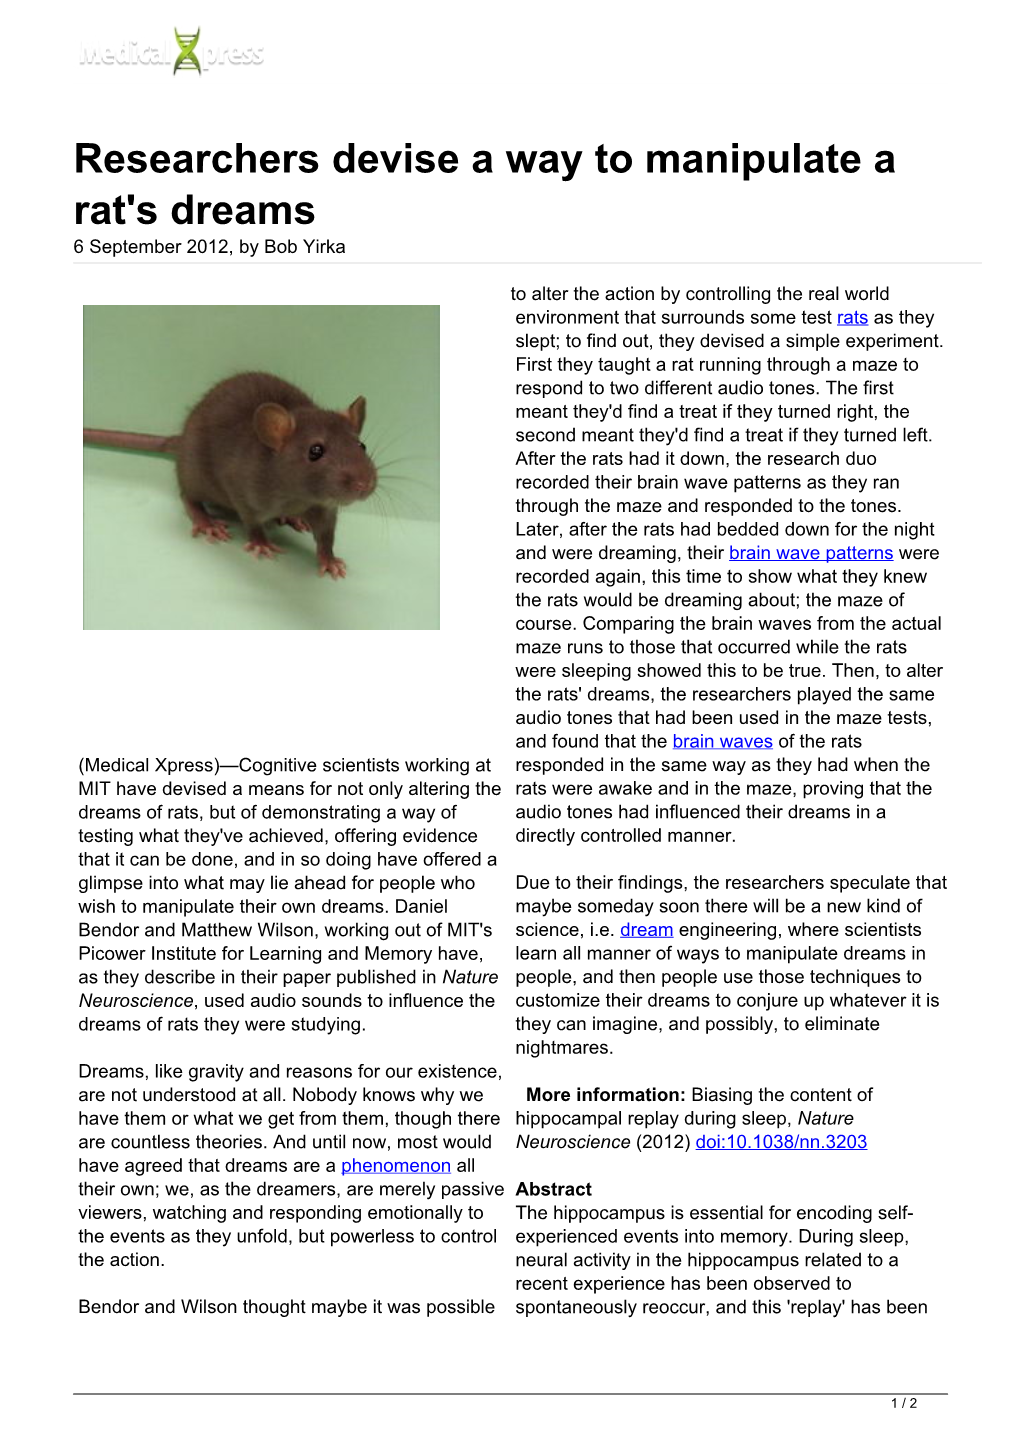 Researchers Devise a Way to Manipulate a Rat's Dreams 6 September 2012, by Bob Yirka